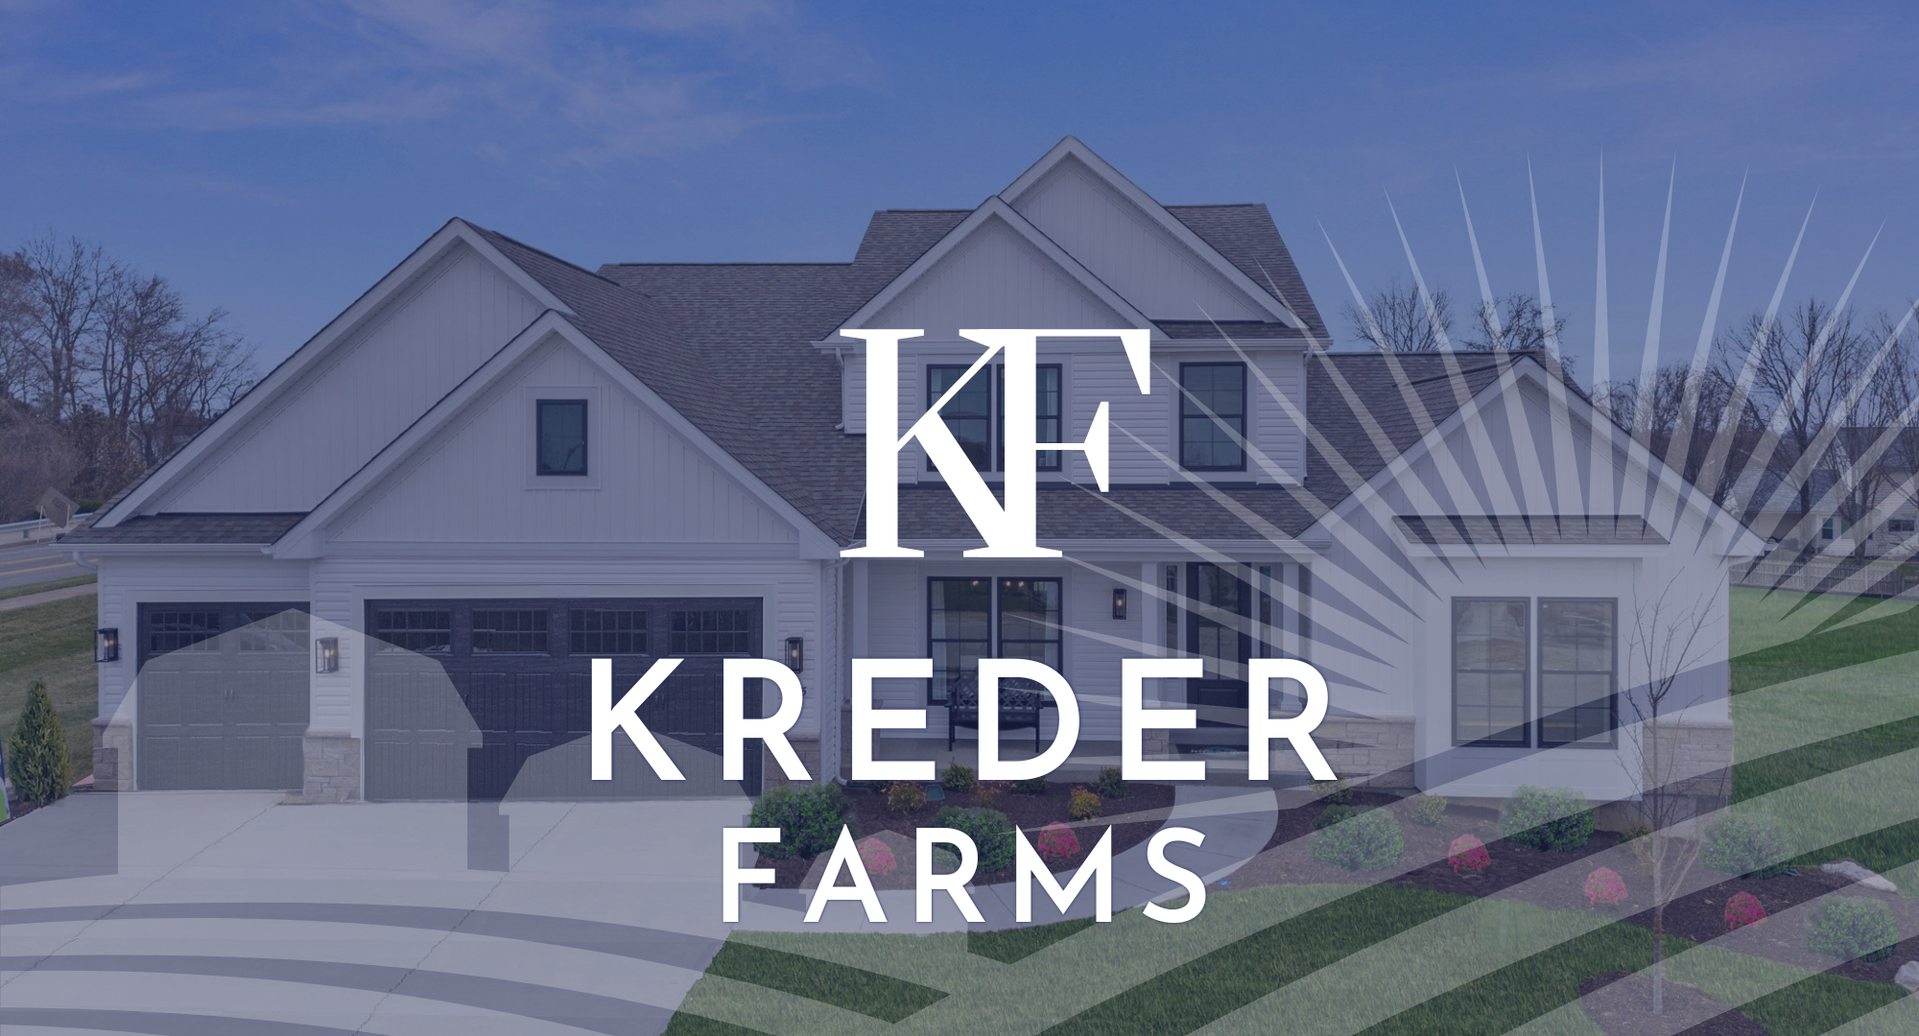 Kreder Farms by Rolwes Company - St. Charles, MO New Homes. Kreder Farms New Homes in St. Charles, MO